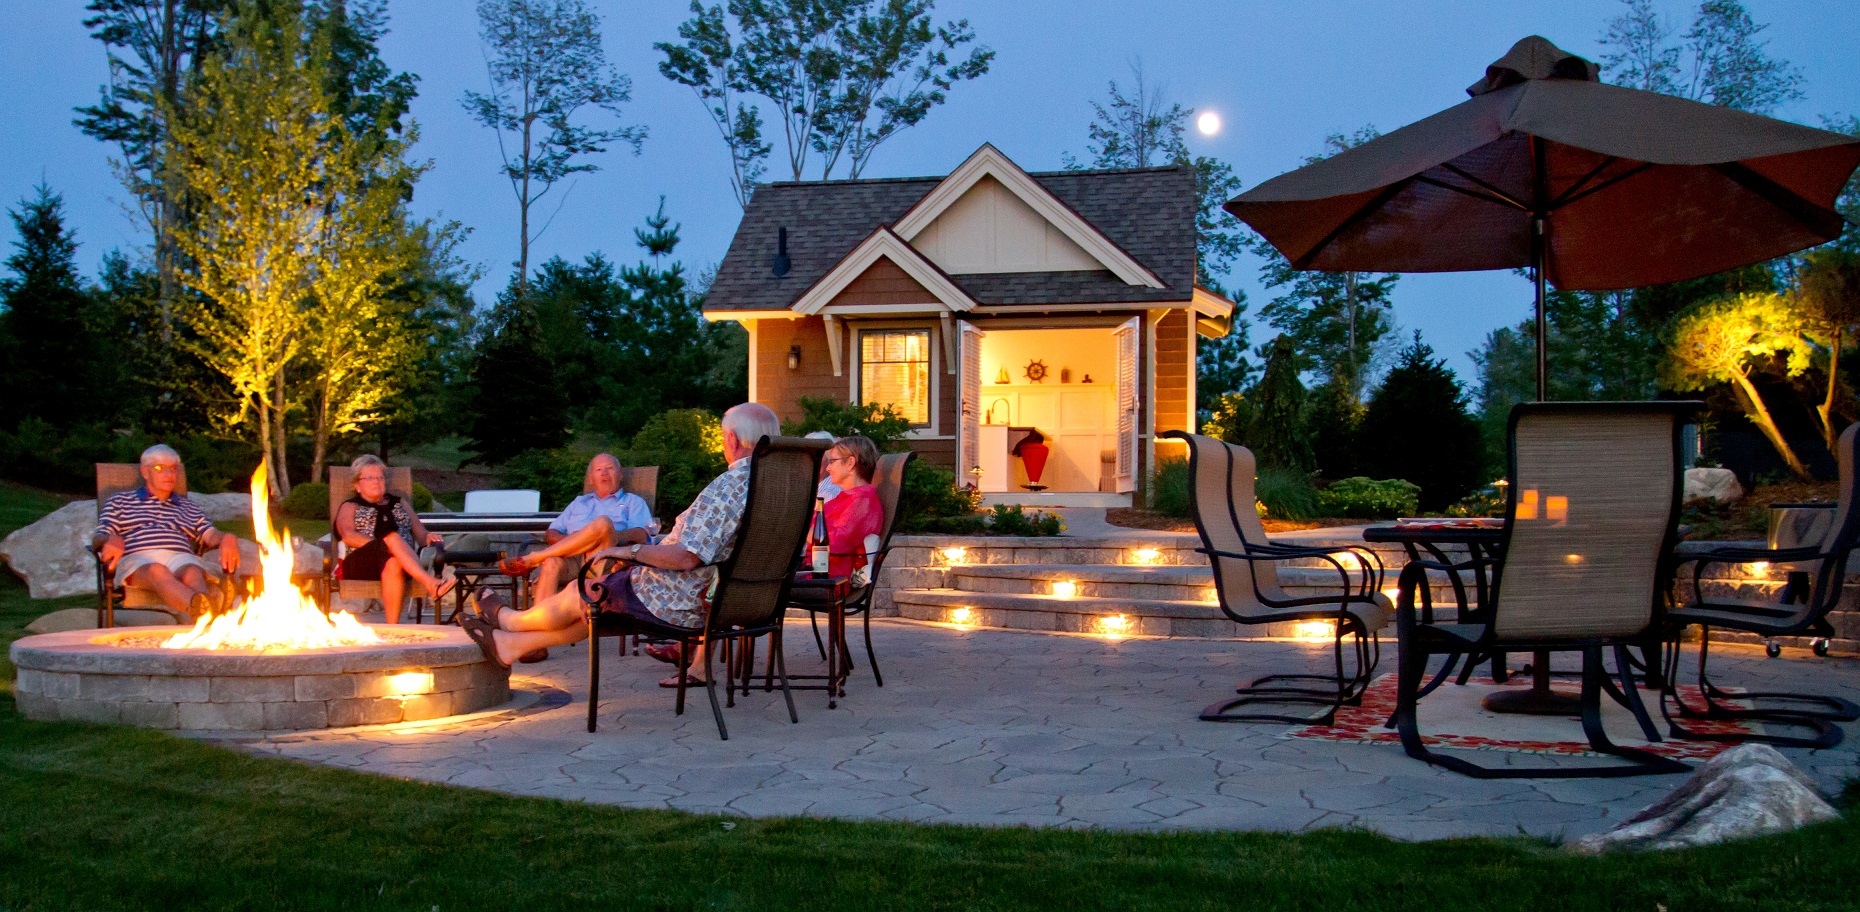 Stunning patio pavers with outdoor fireplace in Grosse Pointe Frms, MI